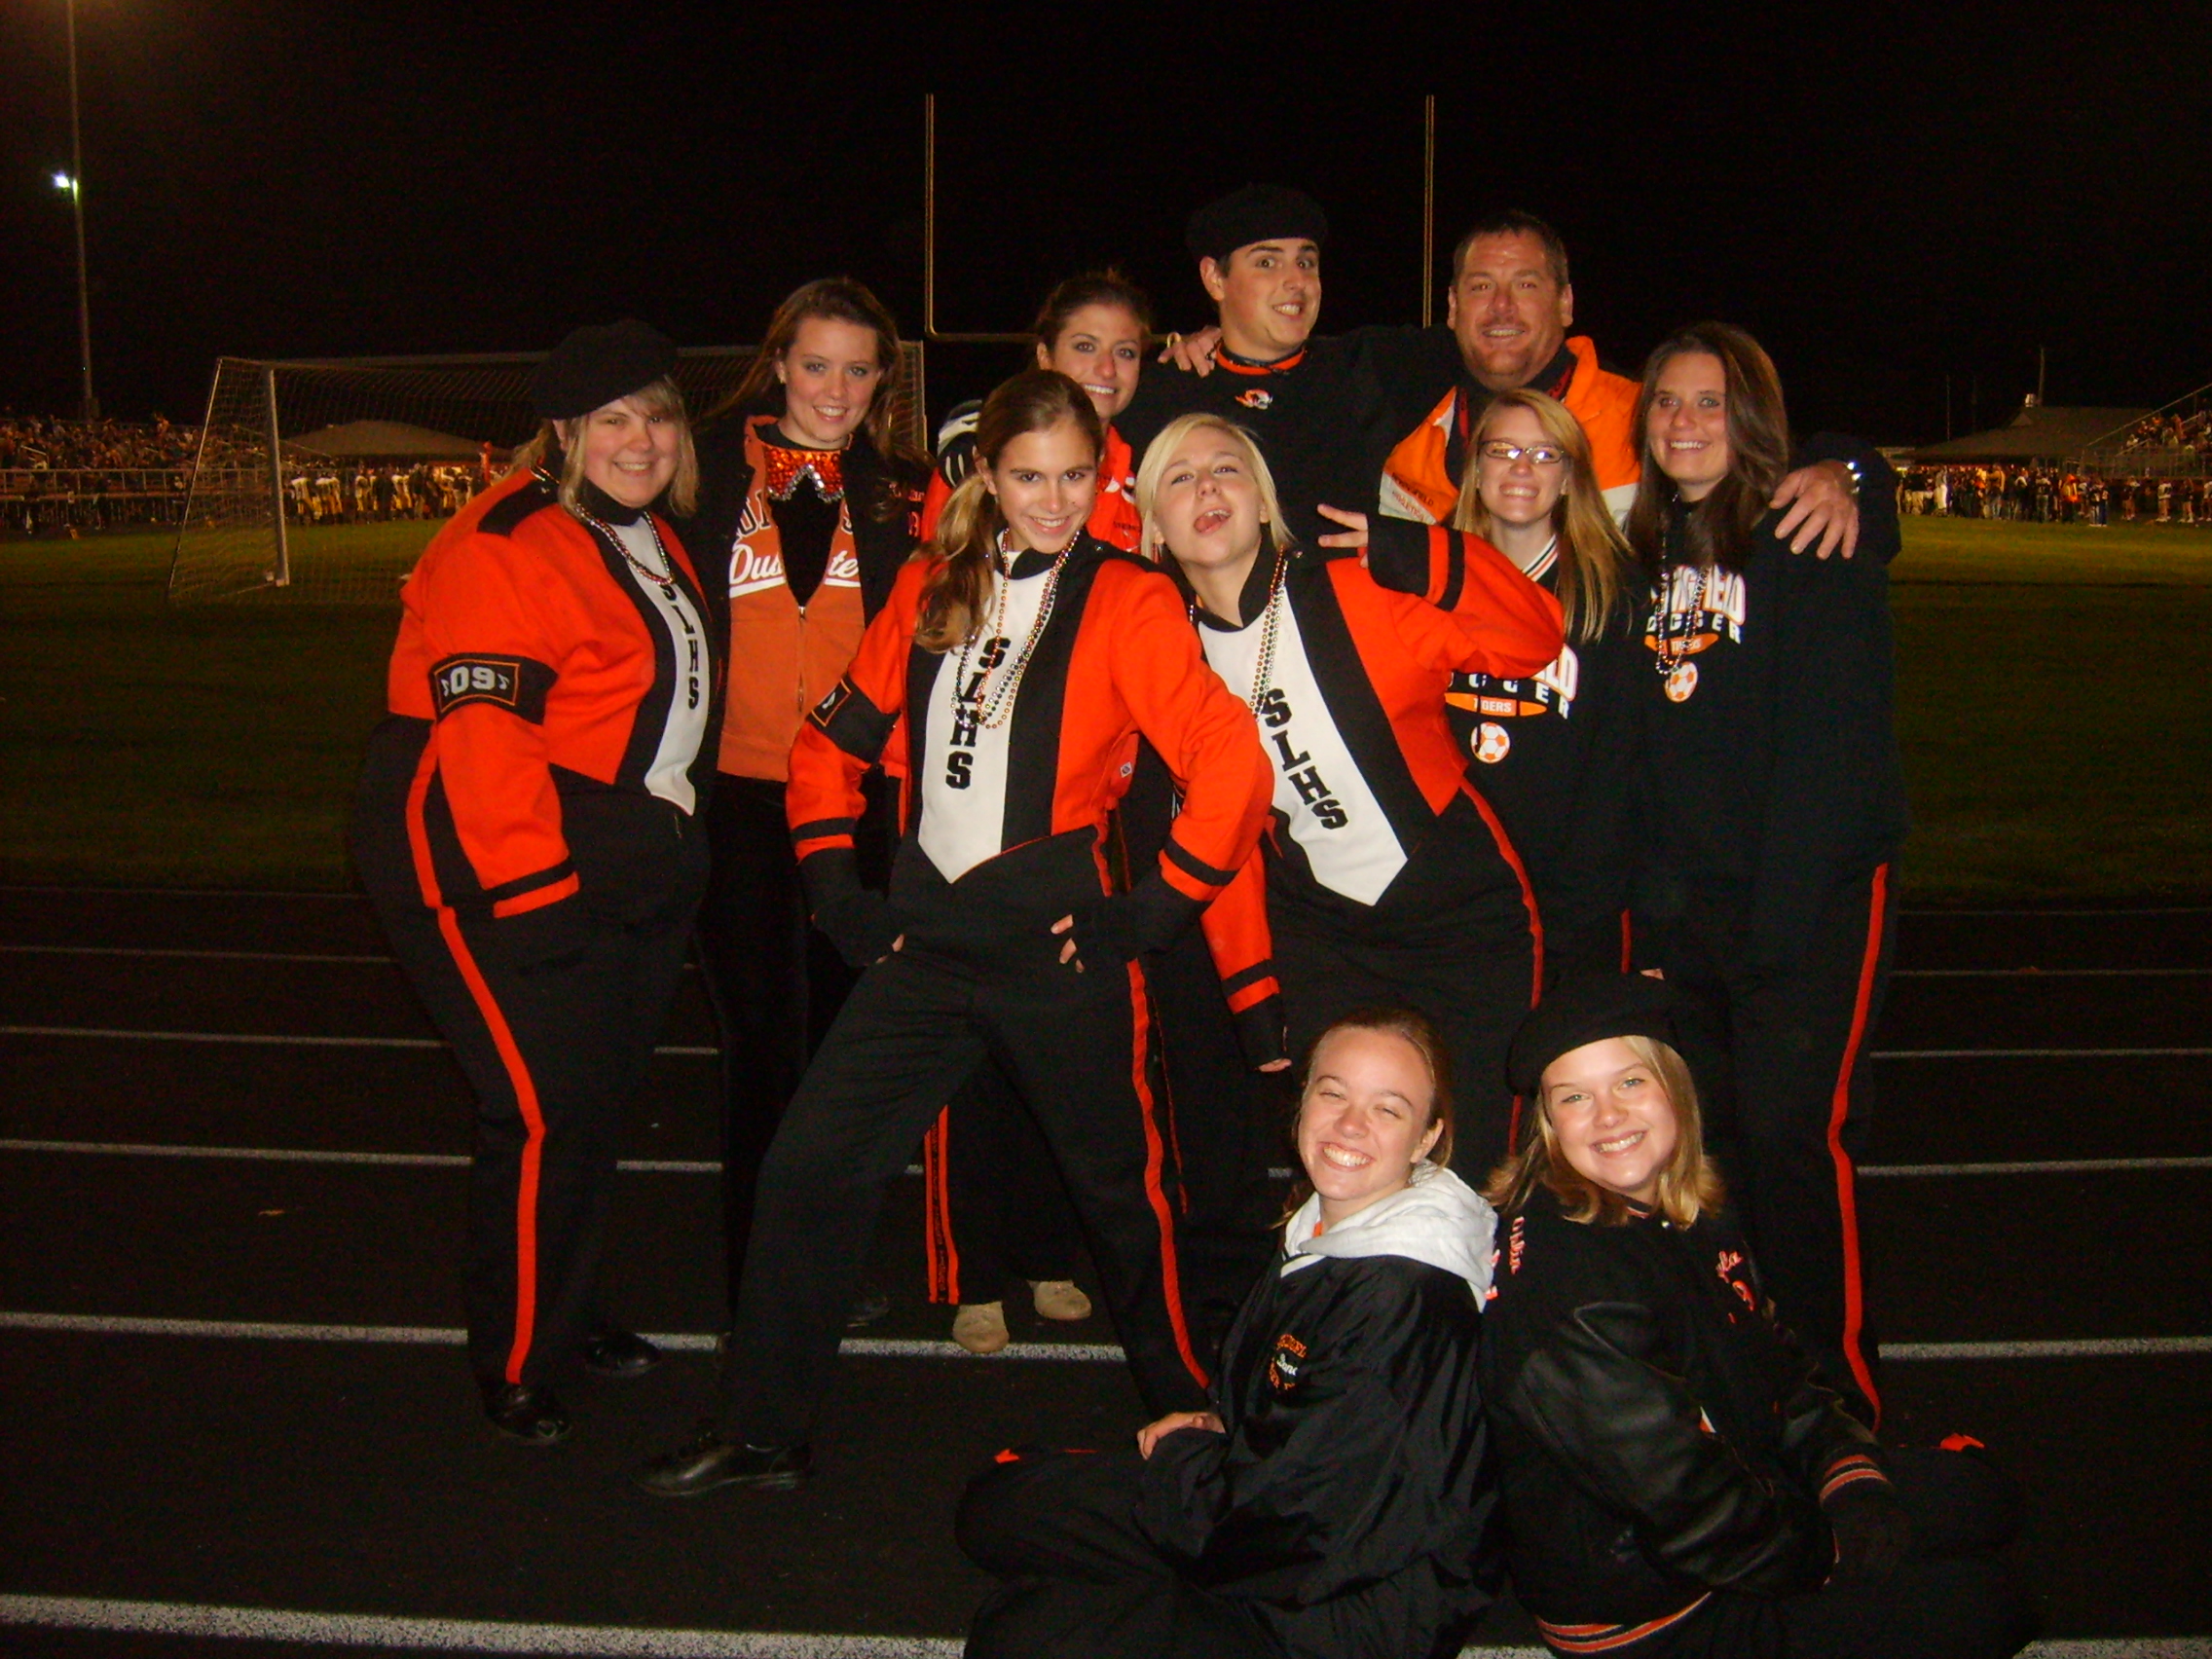 The Springfield Marching Band seniors and director Matt Ferraro prepare for their last home game against Crestview.